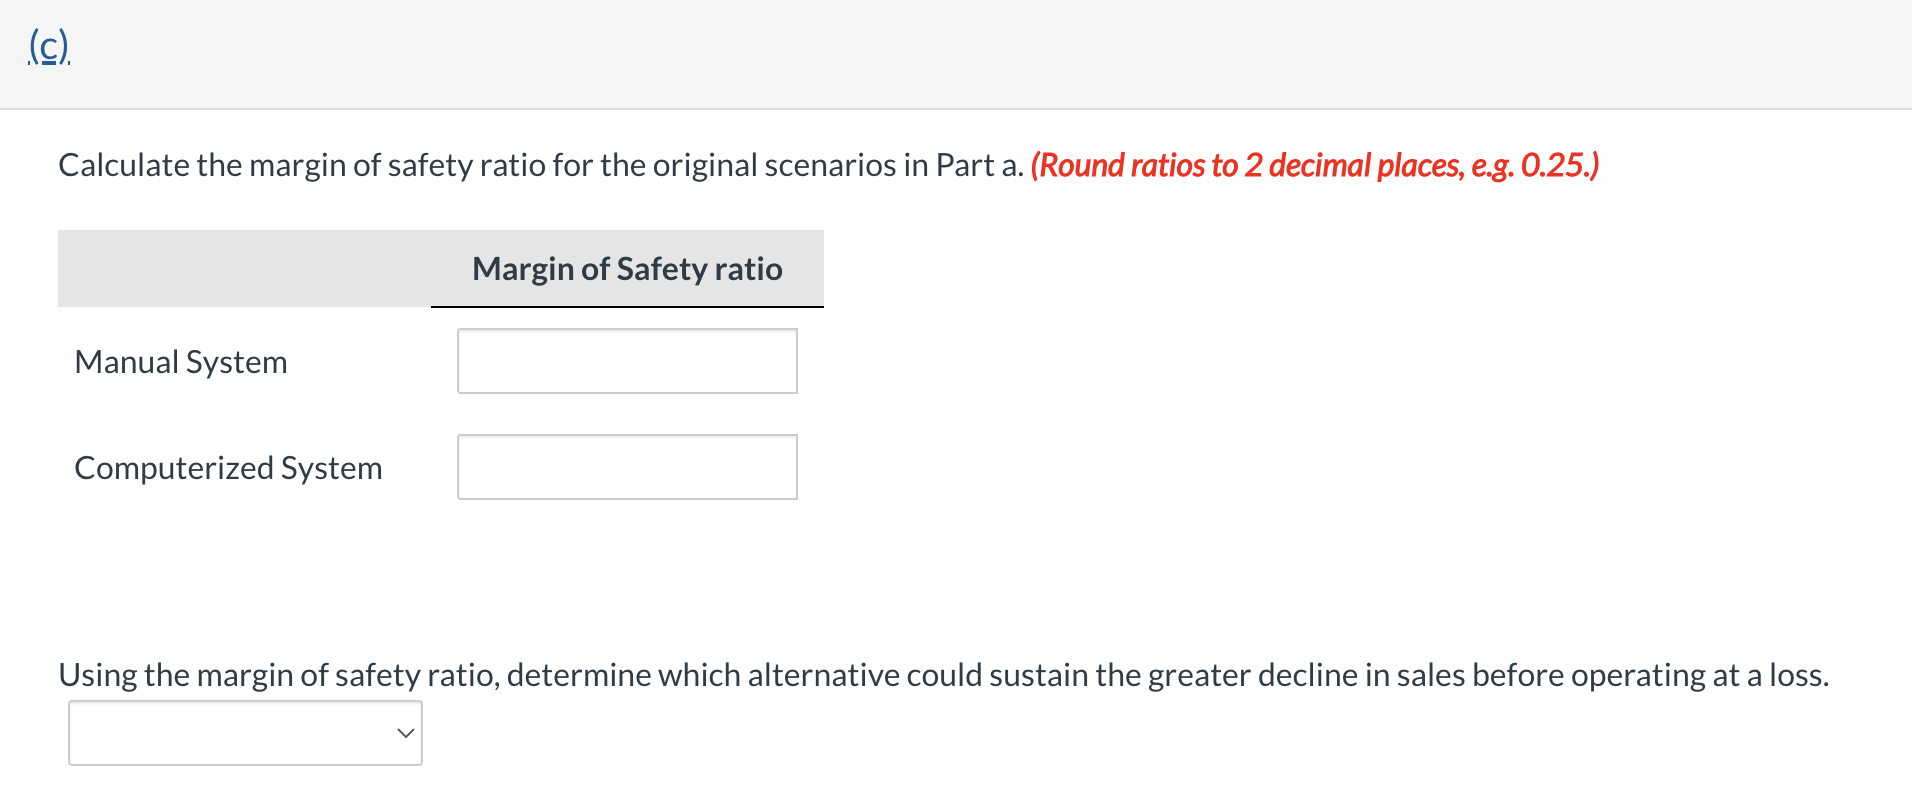 (c).Calculate the margin of safety ratio for the original scenarios in Part a. (Round ratios to 2 decimal places, e.g. 0.25.